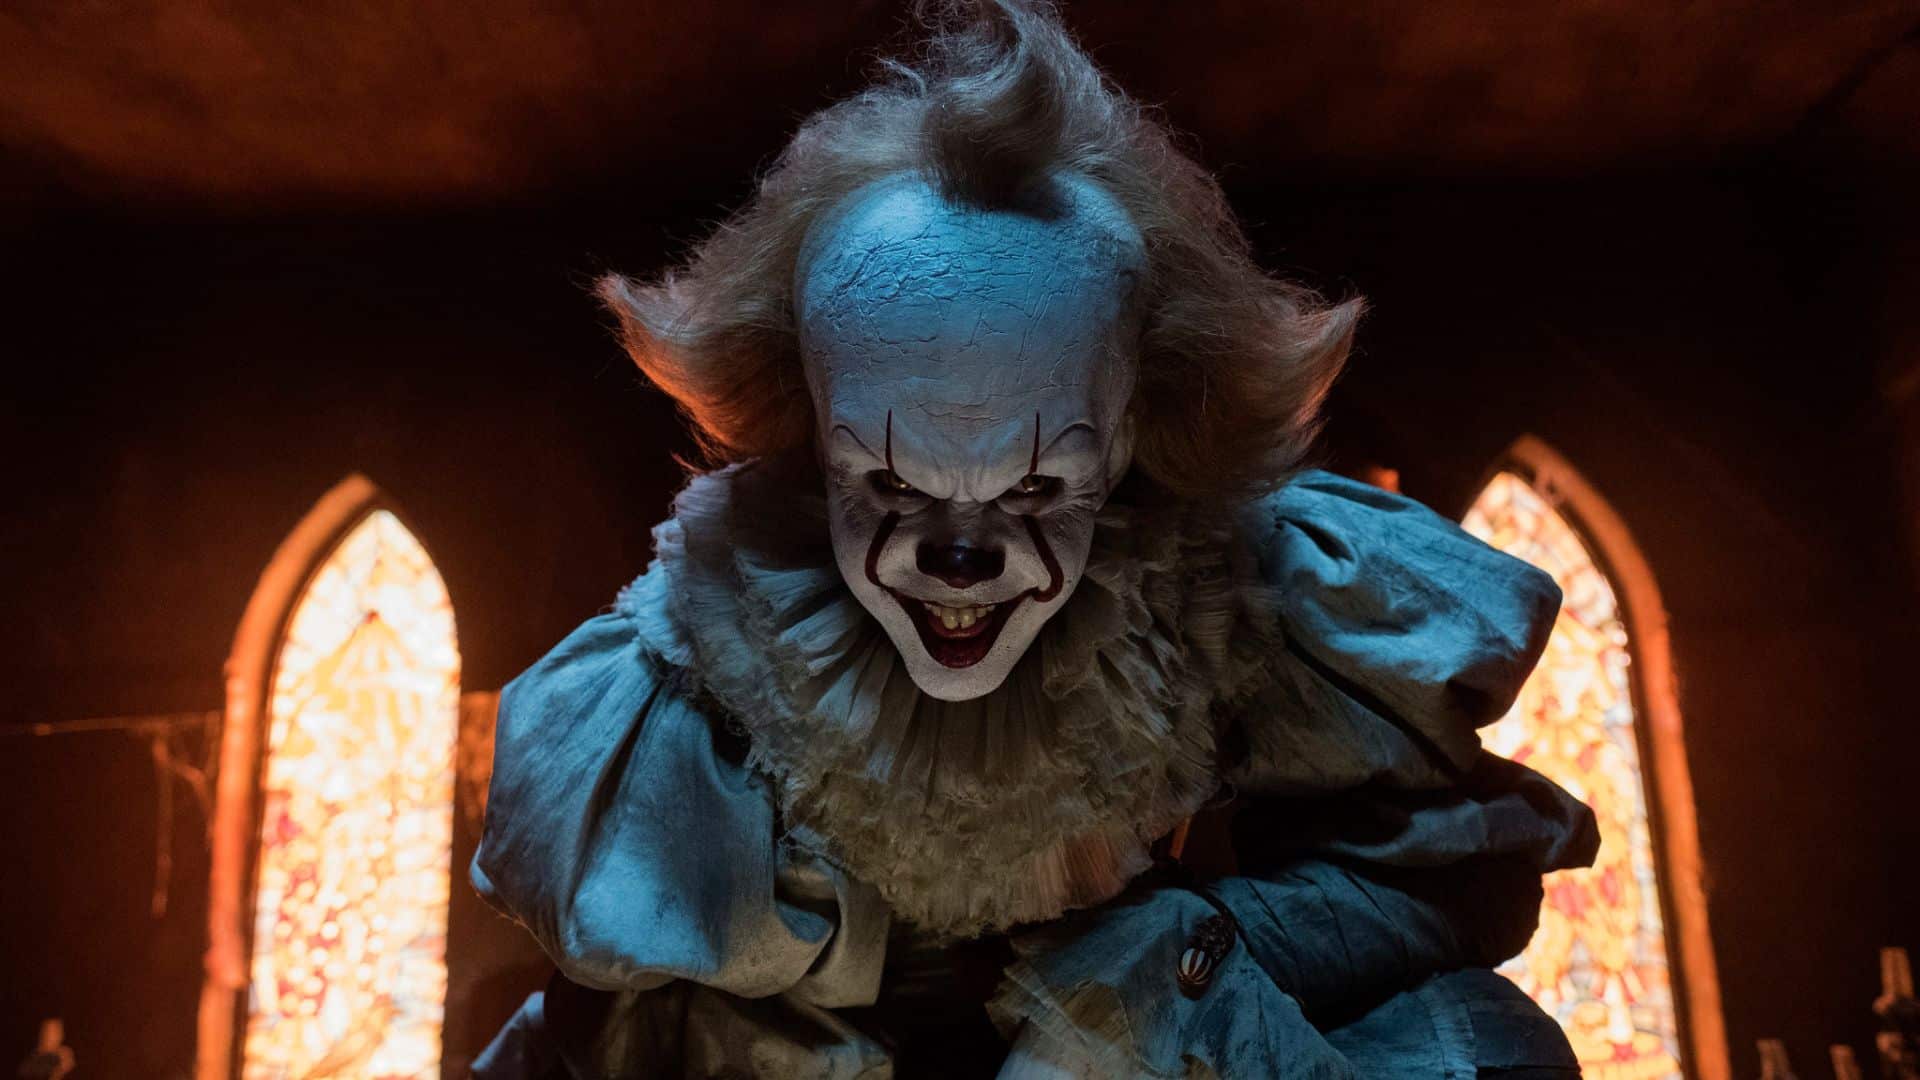 IT (2017) Top Horror Movie in Hollywood